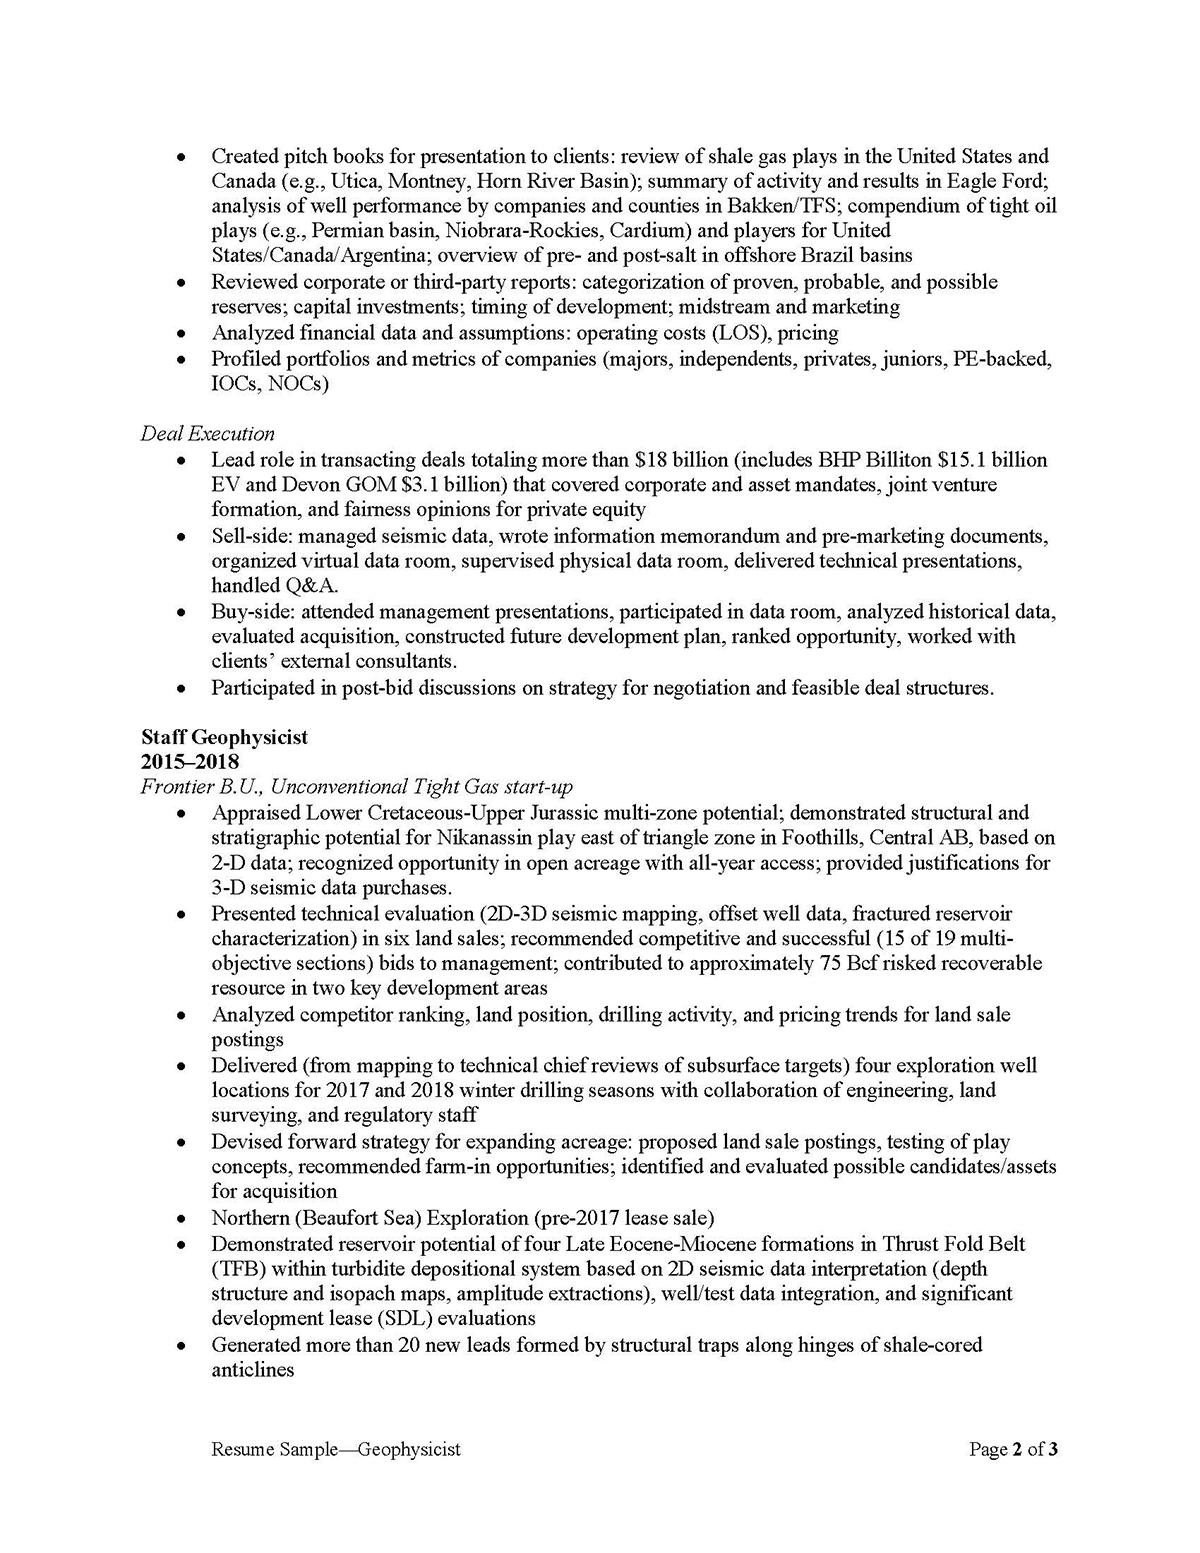 Sample resume: Energy, High Experience, Combination